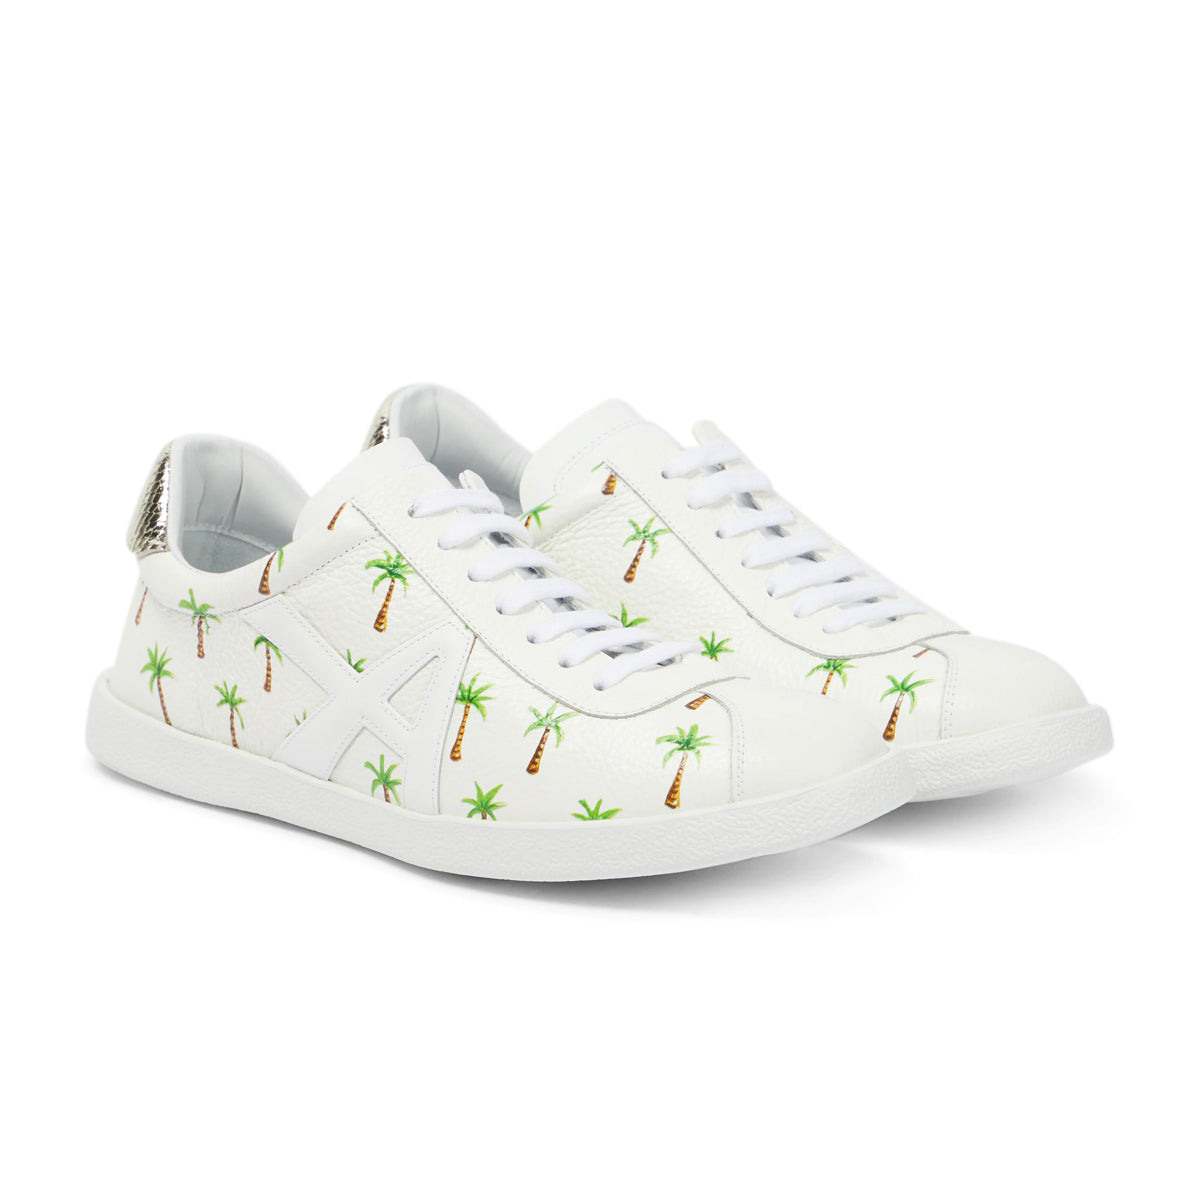 The A Palm Tree Sneaker